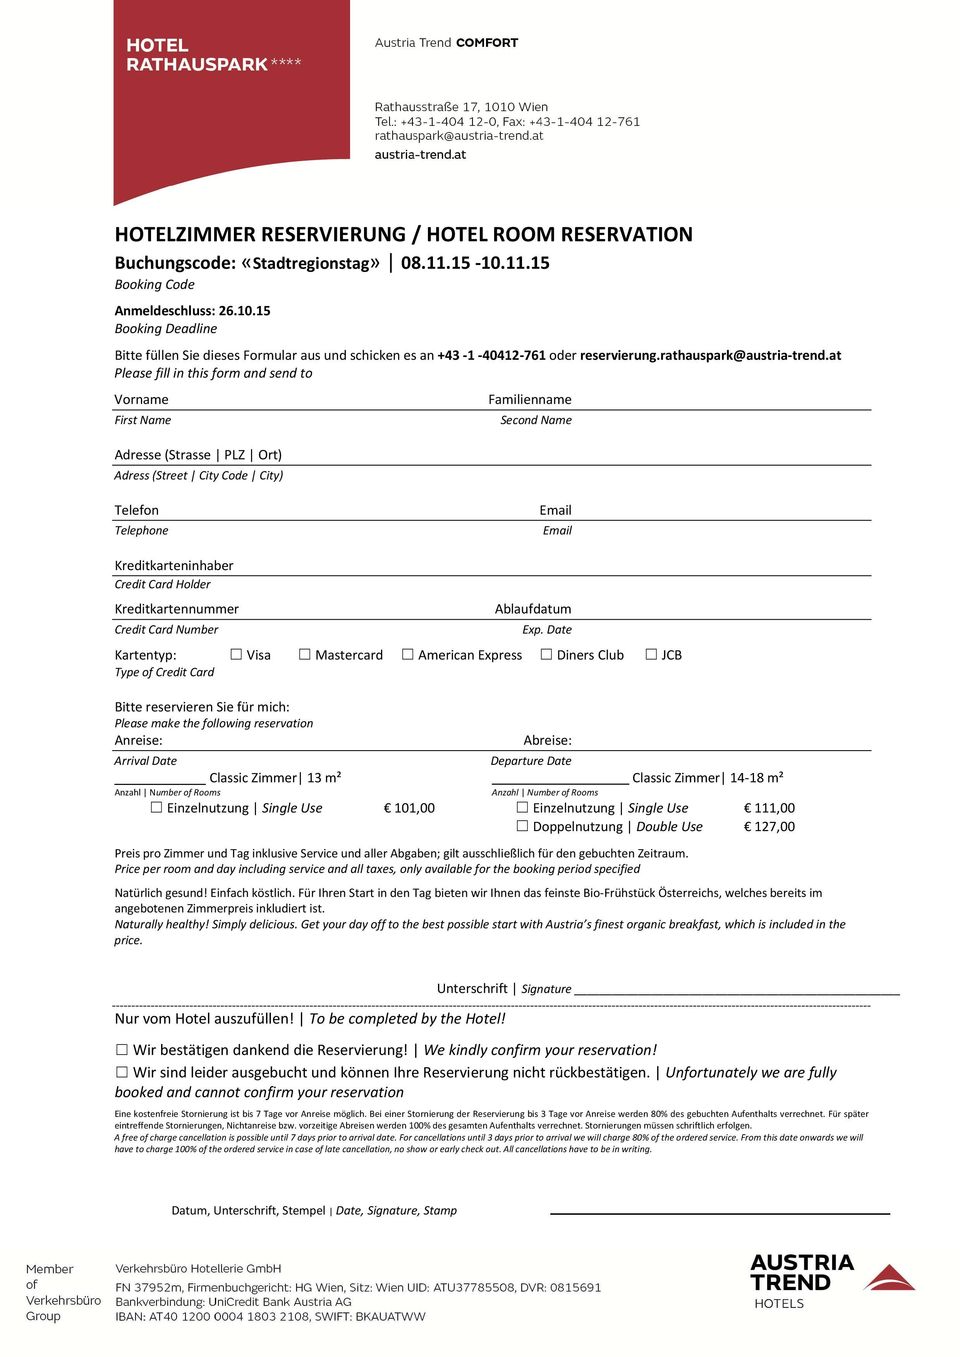 at Please fill in this form and send to Vorname First Name Adresse (Strasse PLZ Ort) Adress (Street City Code City) Familienname Second Name Telefon Telephone Email Email Kreditkarteninhaber Credit